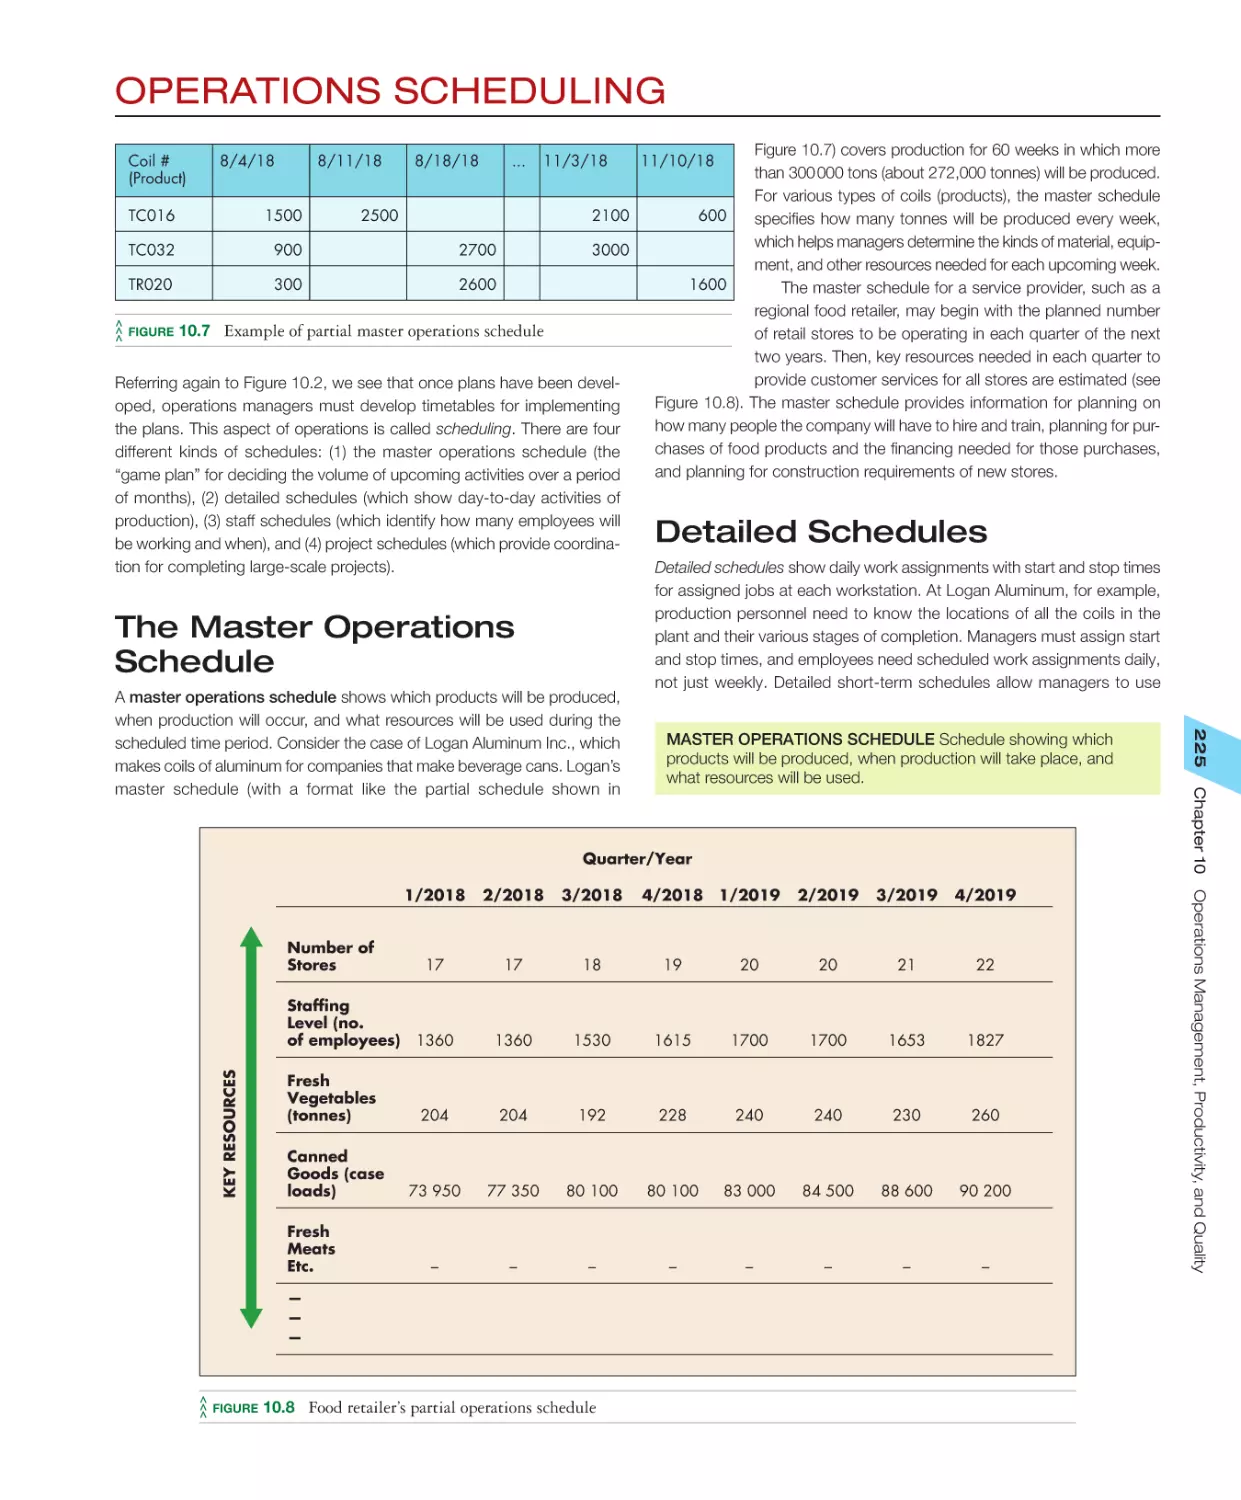 Operations Scheduling
The Master Operations Schedule
Detailed Schedules